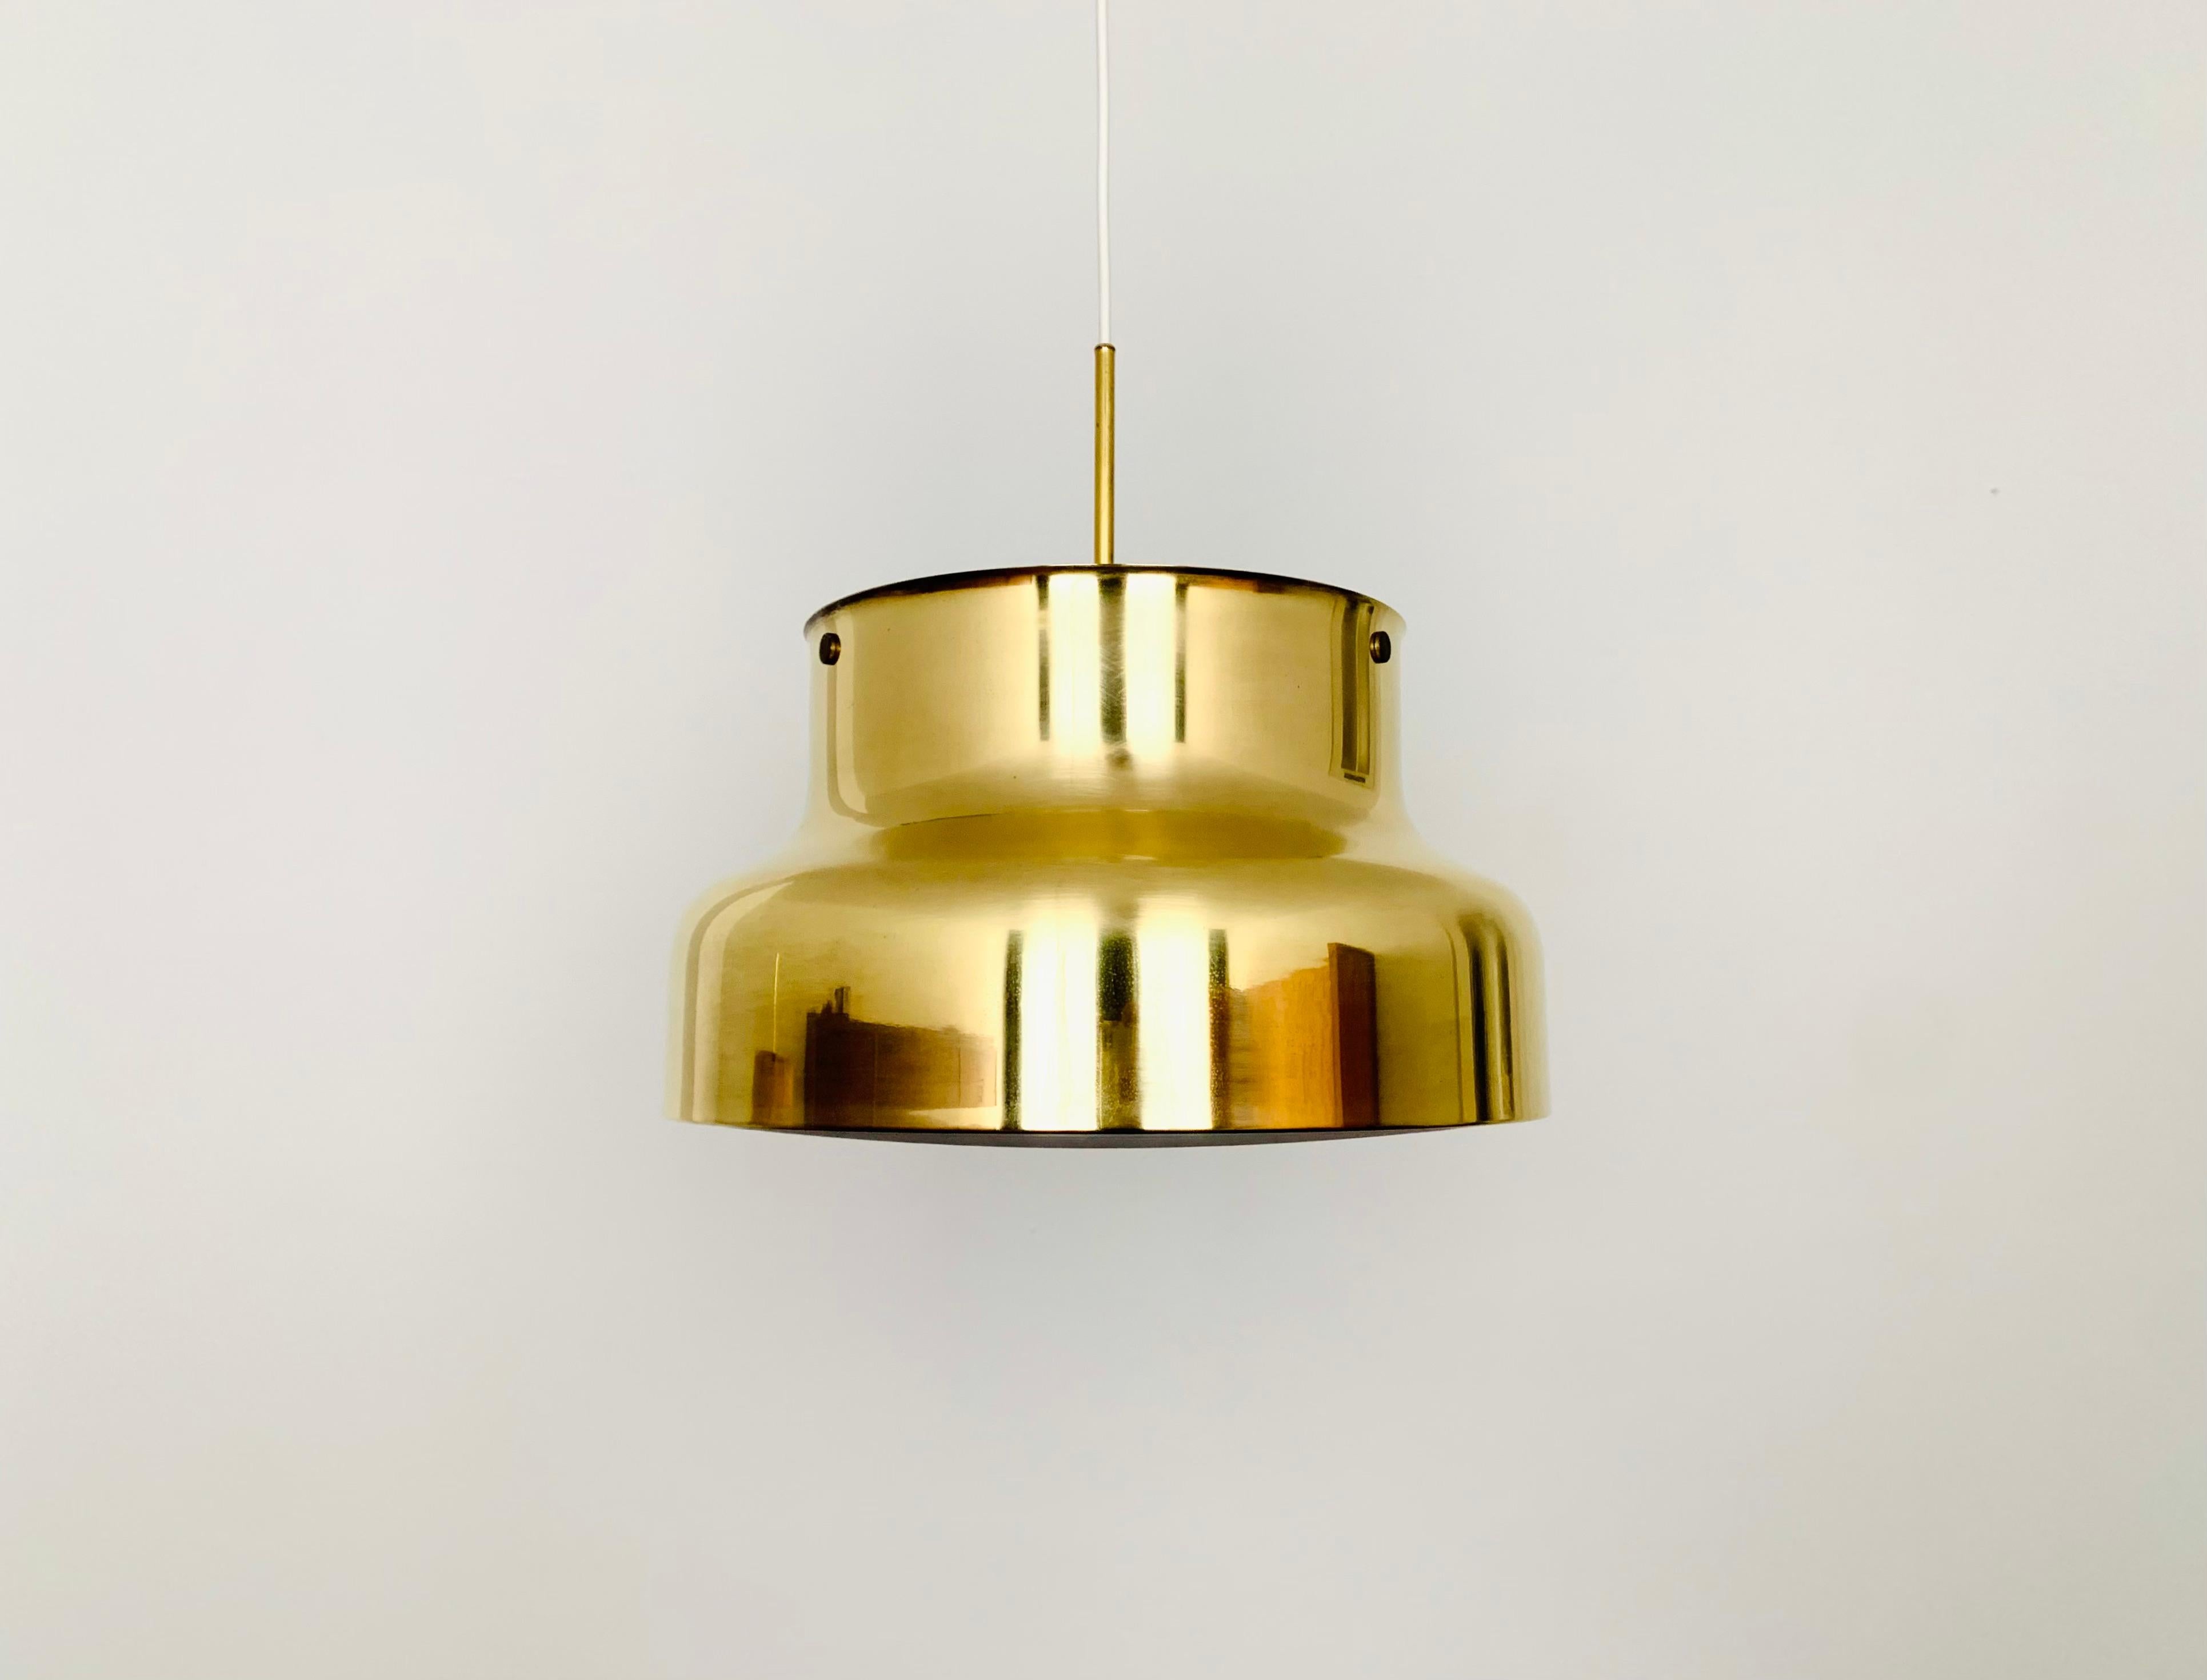 Wonderful Bumling pendant lamp with reflector from the 1960s.
The design of the lamp is a real asset and an absolute favorite for every home.
A very nice play of light is created.

Design: Anders Pehrson
Manufacturer: Atelje Lyktan Ahus

The